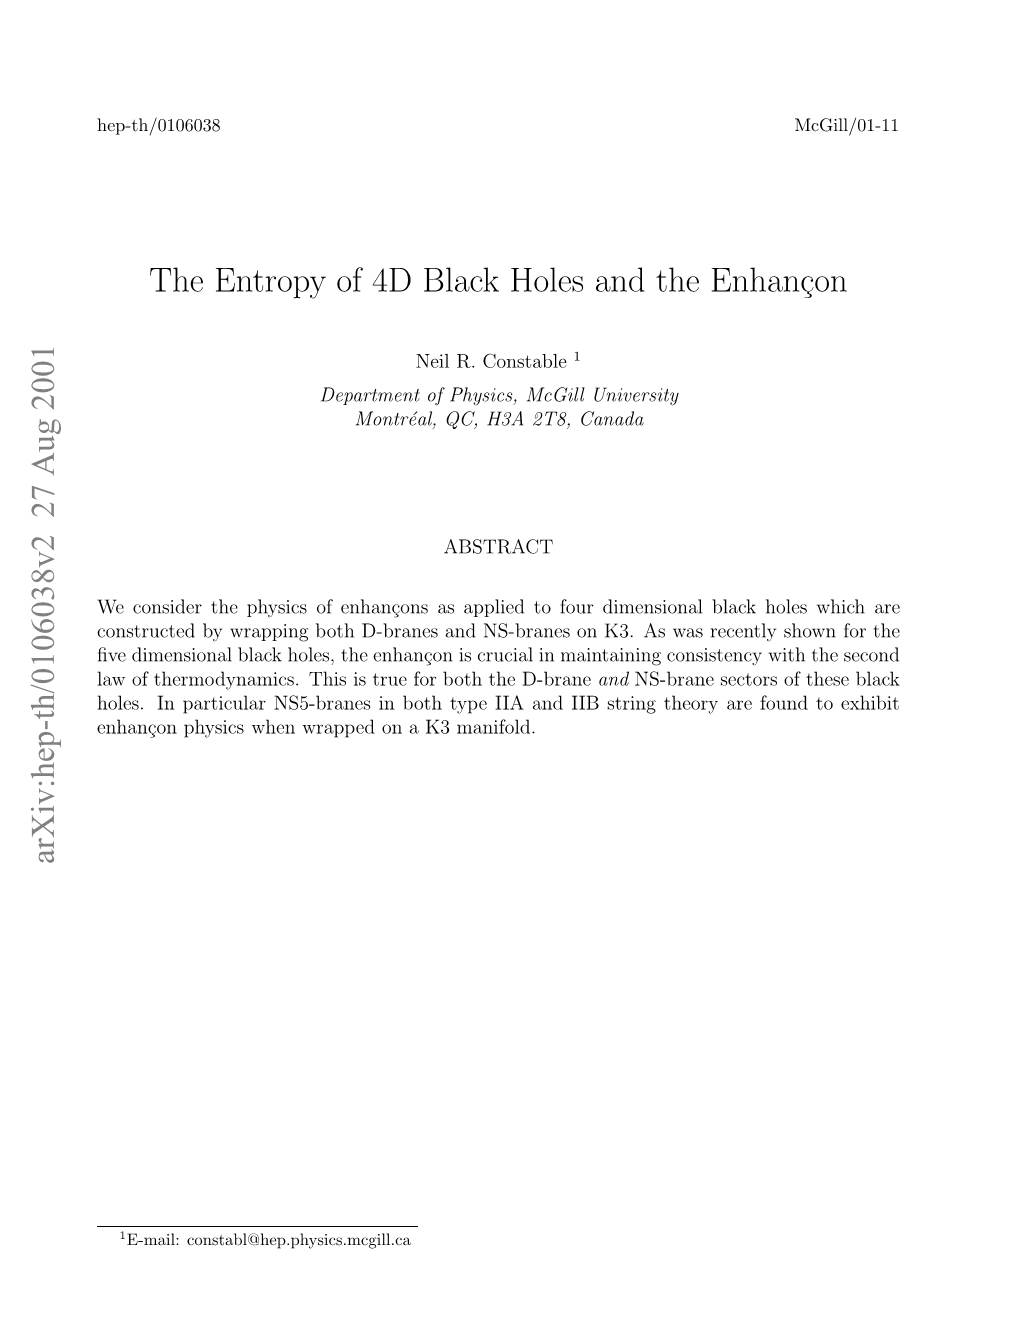 The Entropy of 4D Black Holes and the Enhancon